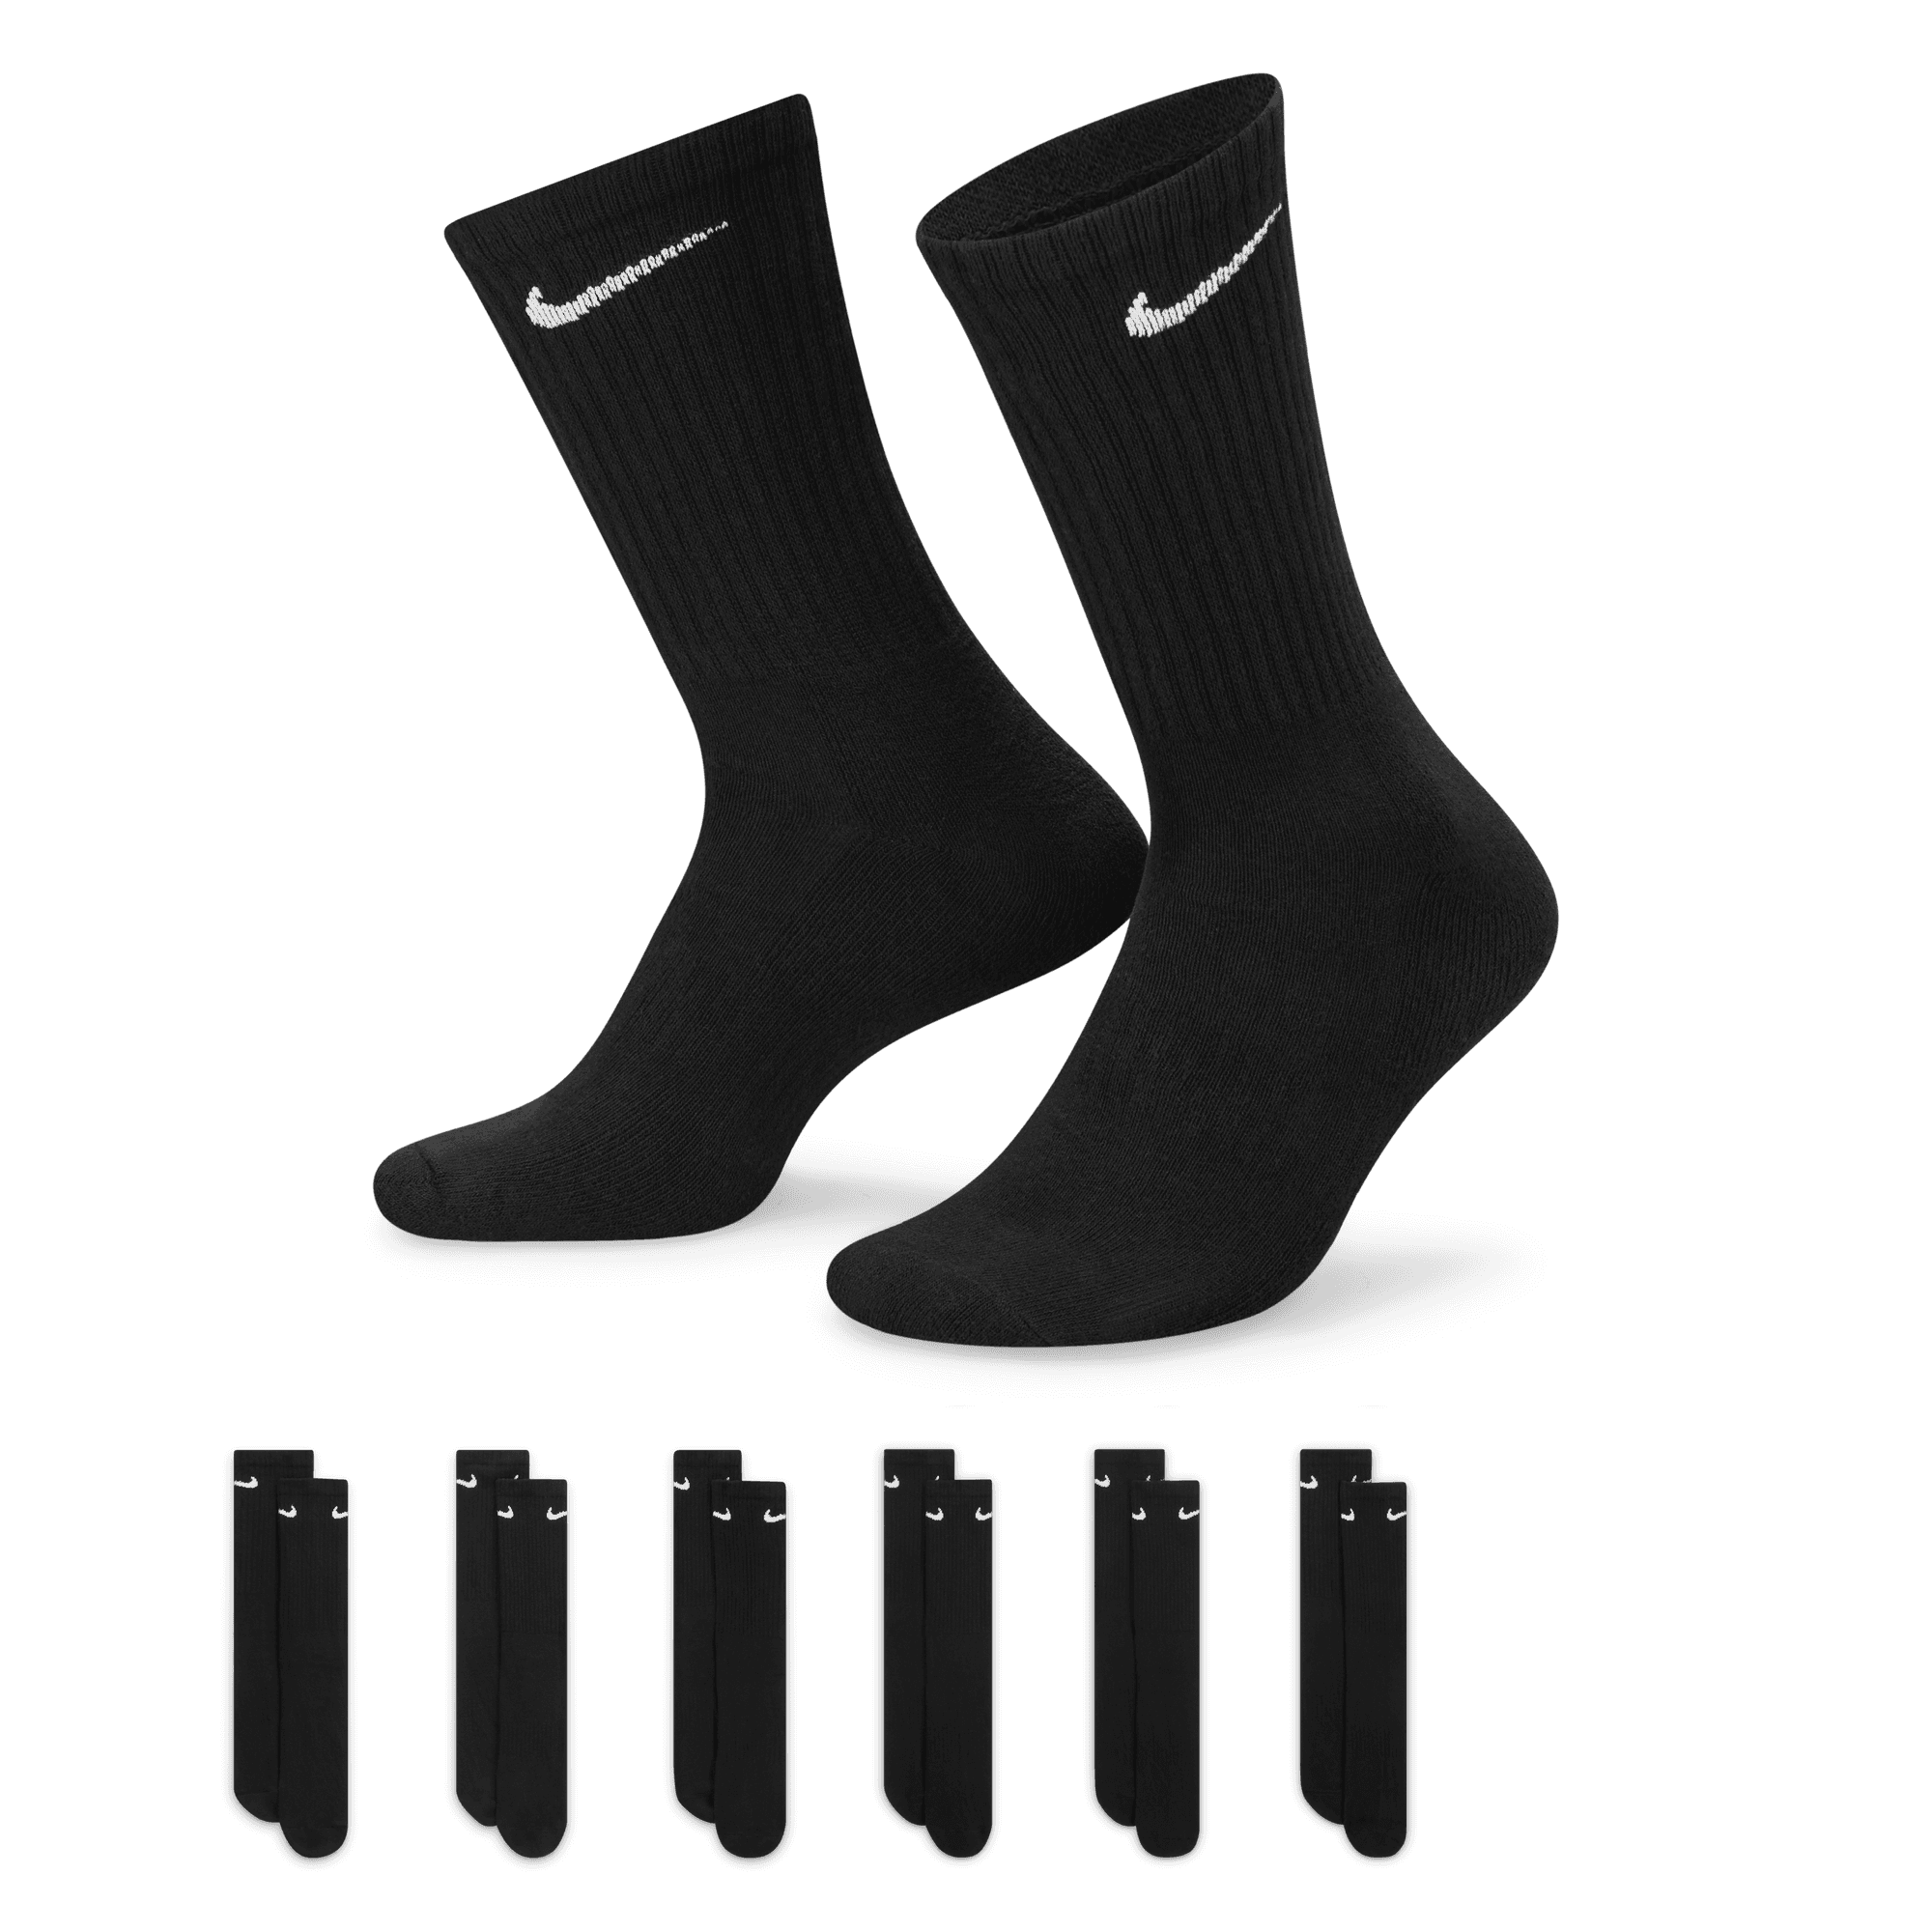 Men`s Ankle Socks with Cushion, Sport Athletic Running Socks - XW02223 -  IdeaStage Promotional Products